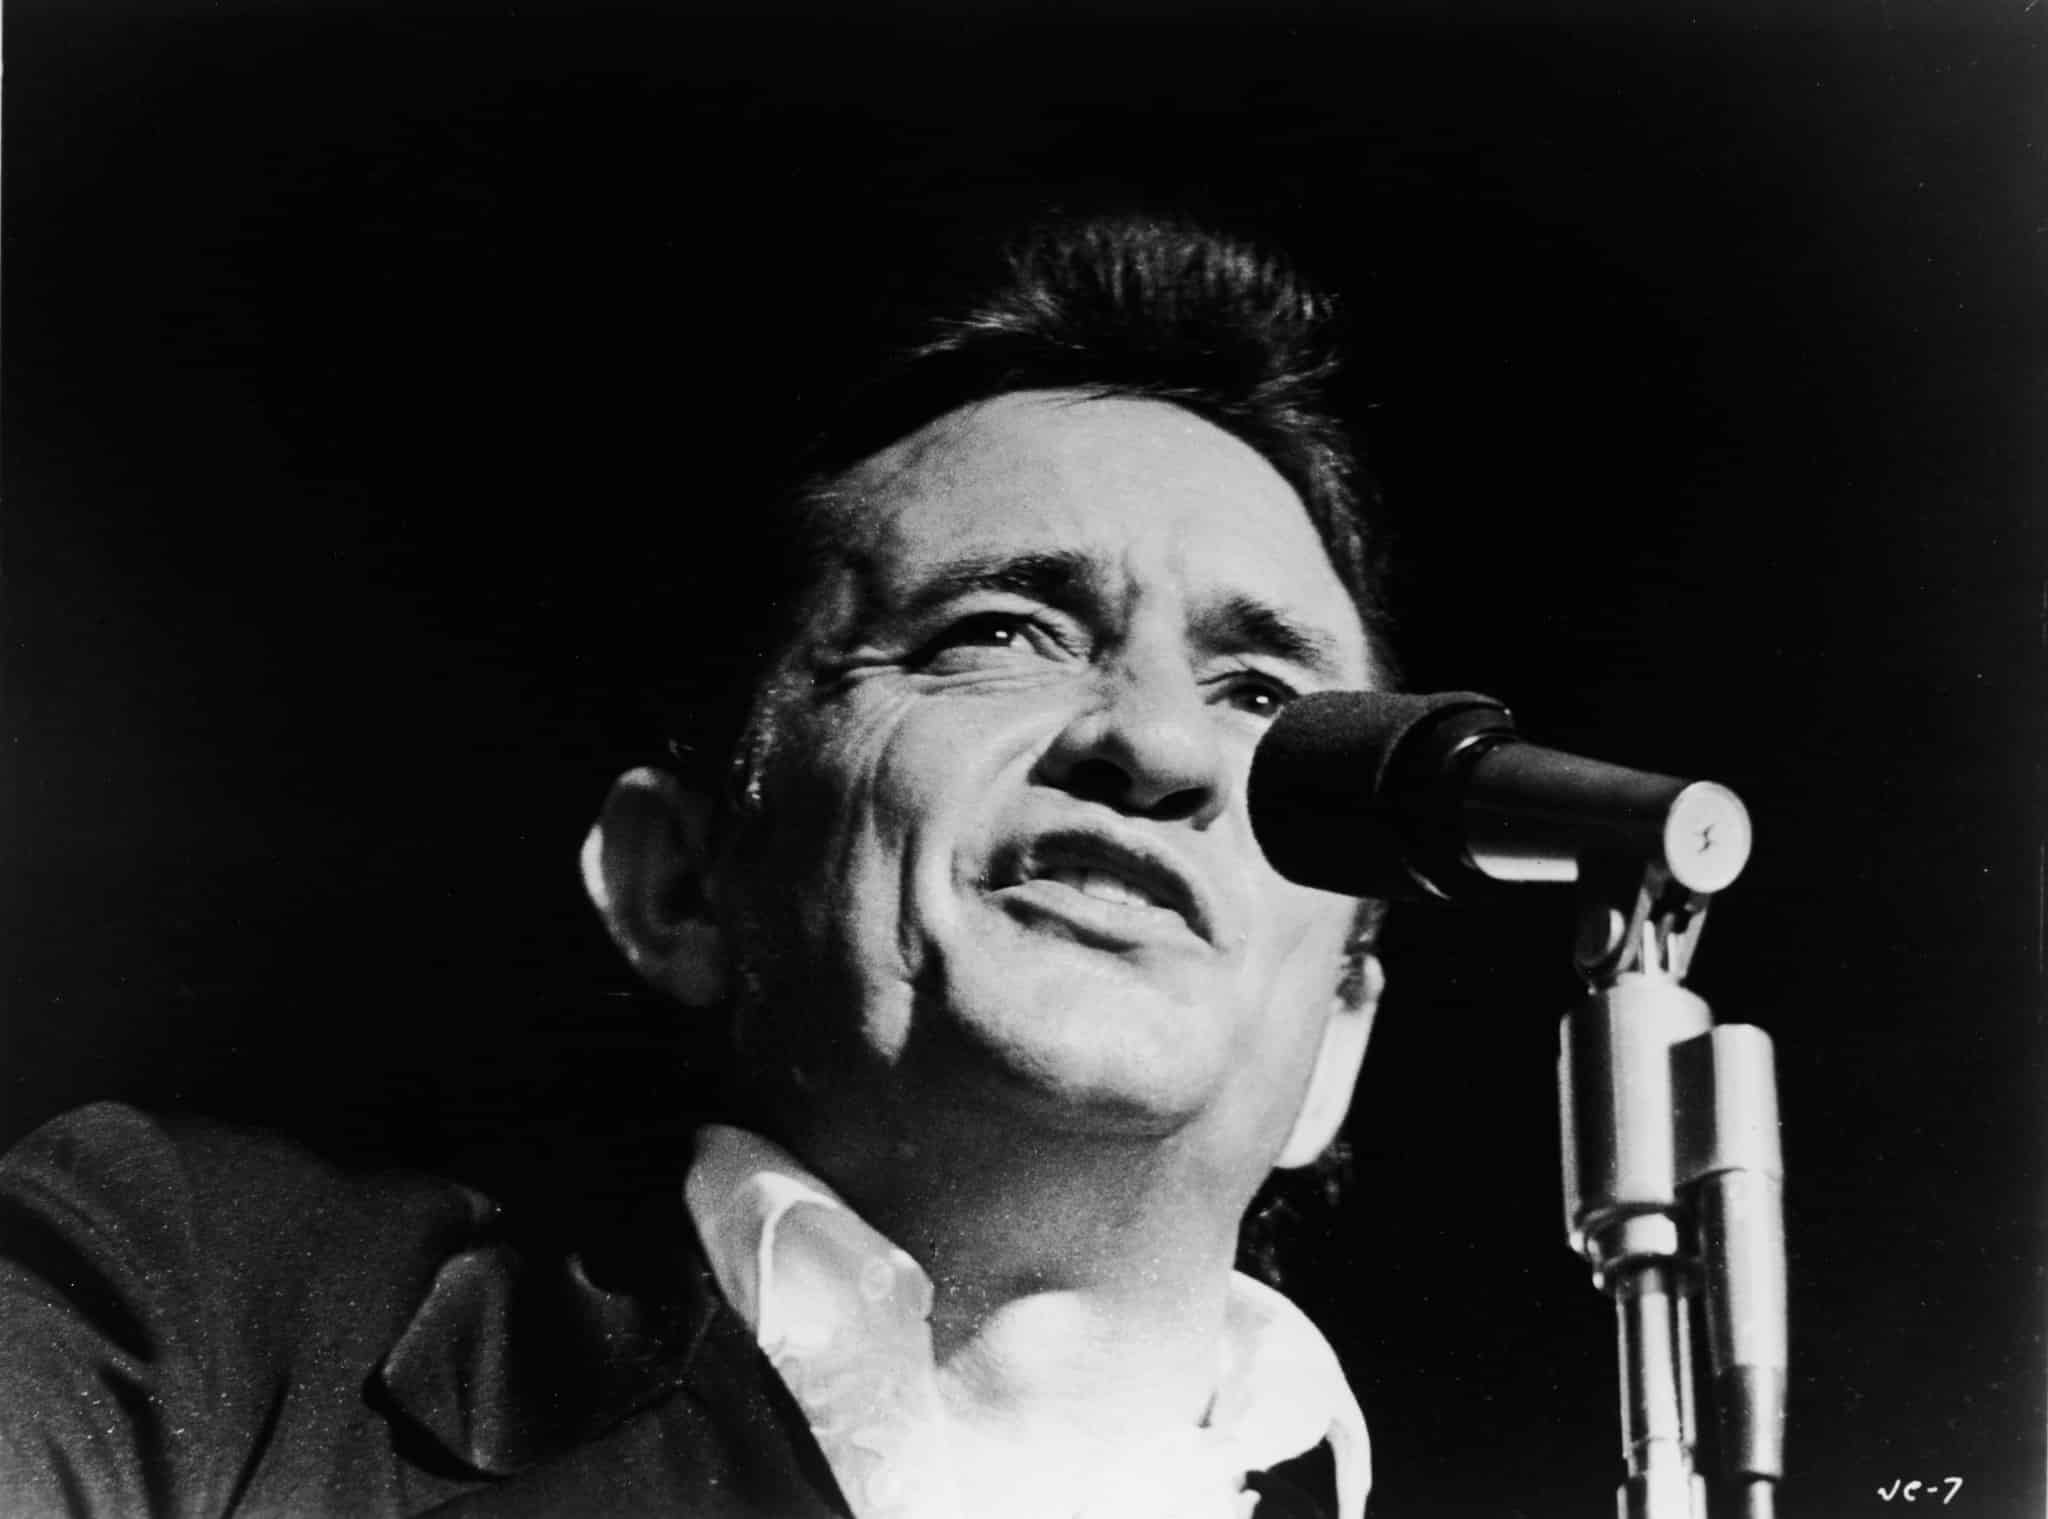 Headshot of American country singer Johnny Cash (1932 - 2003) singing on stage in a still from the film, 'Johnny Cash - The Man, His World, His Music,' directed by Robert Elfstrom, 1969. 